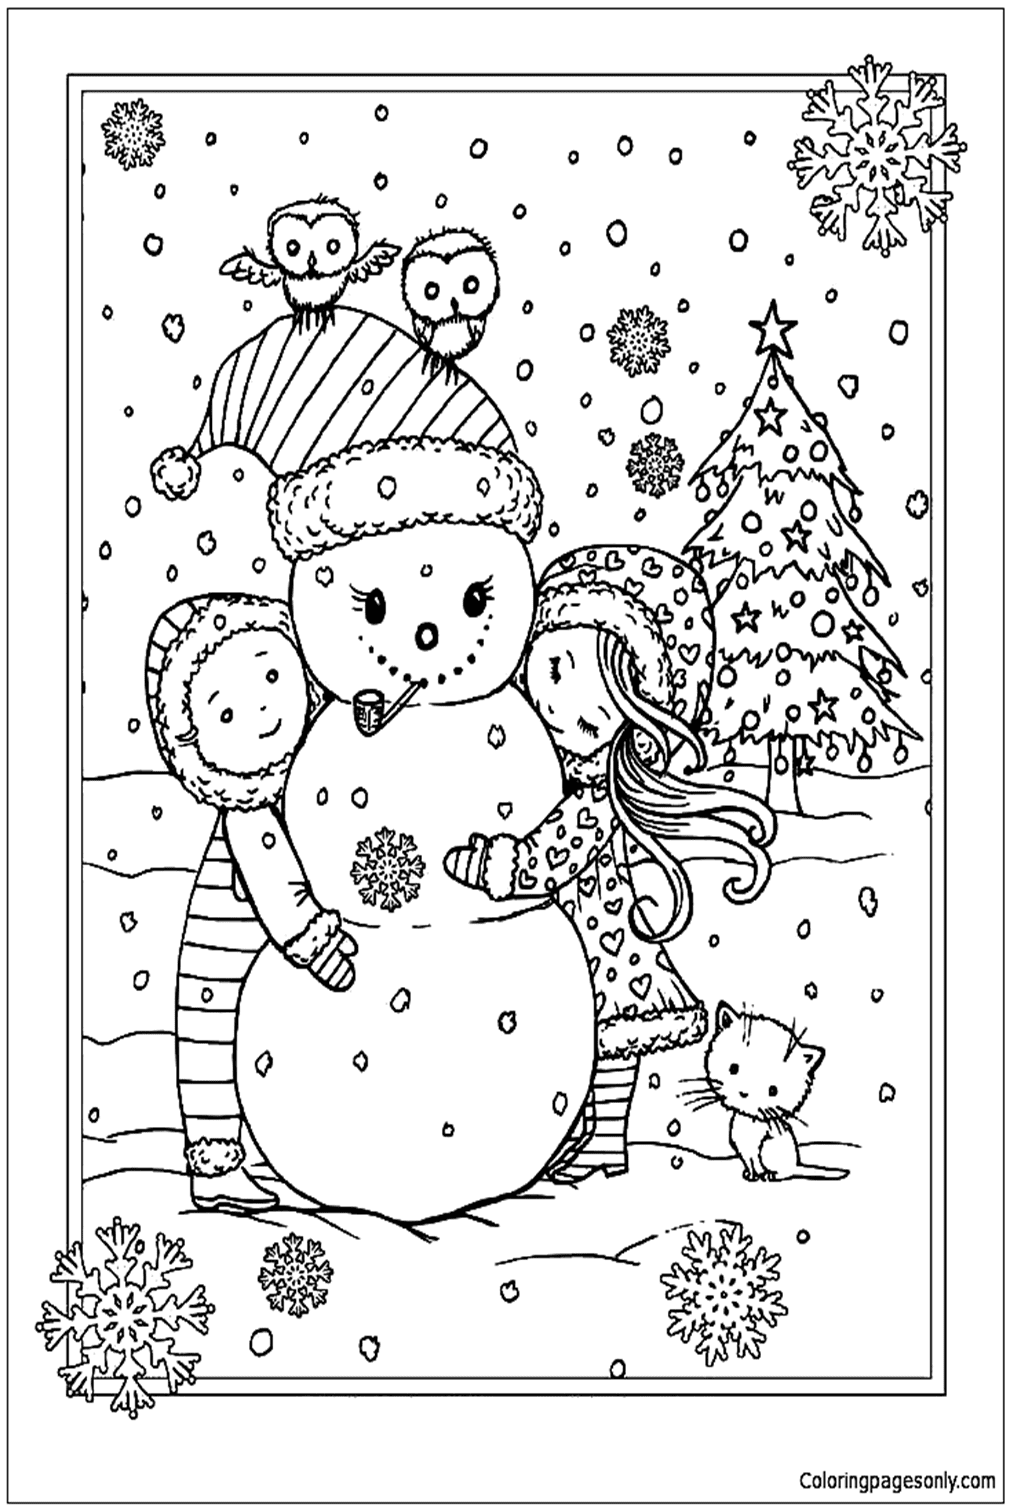 Children With Snowman During Christmas Coloring Page